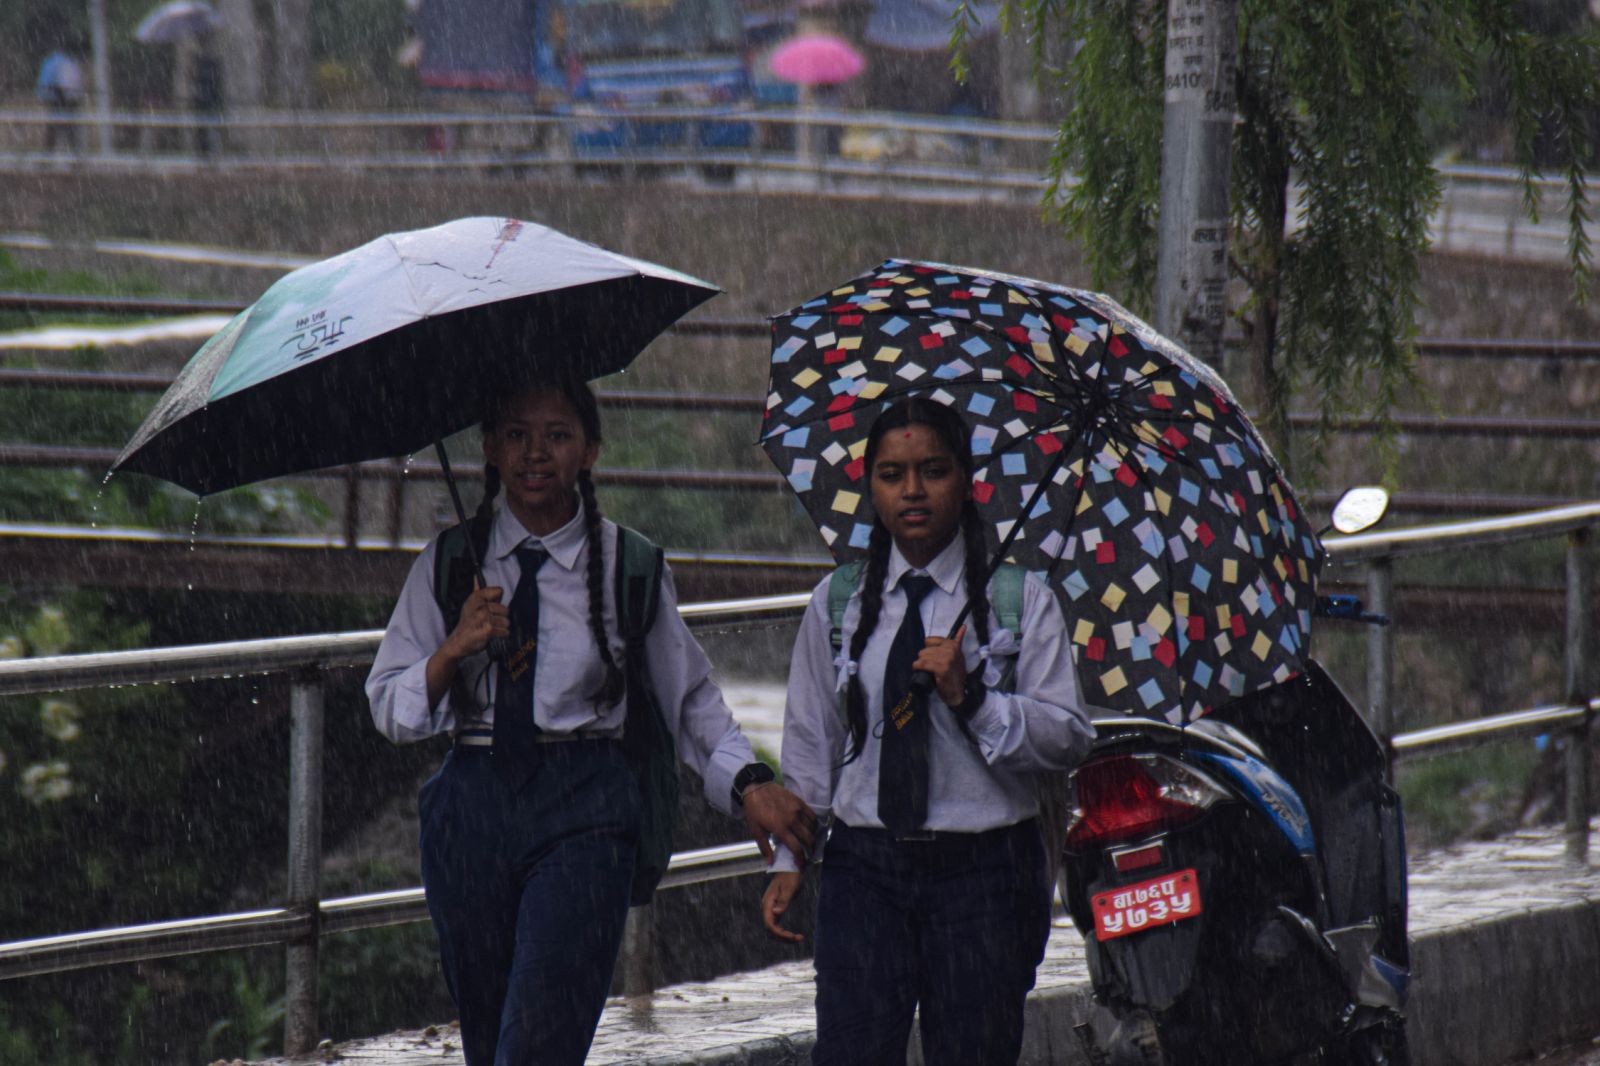 Light rainfall likely in hilly areas including Koshi and Madhesh provinces